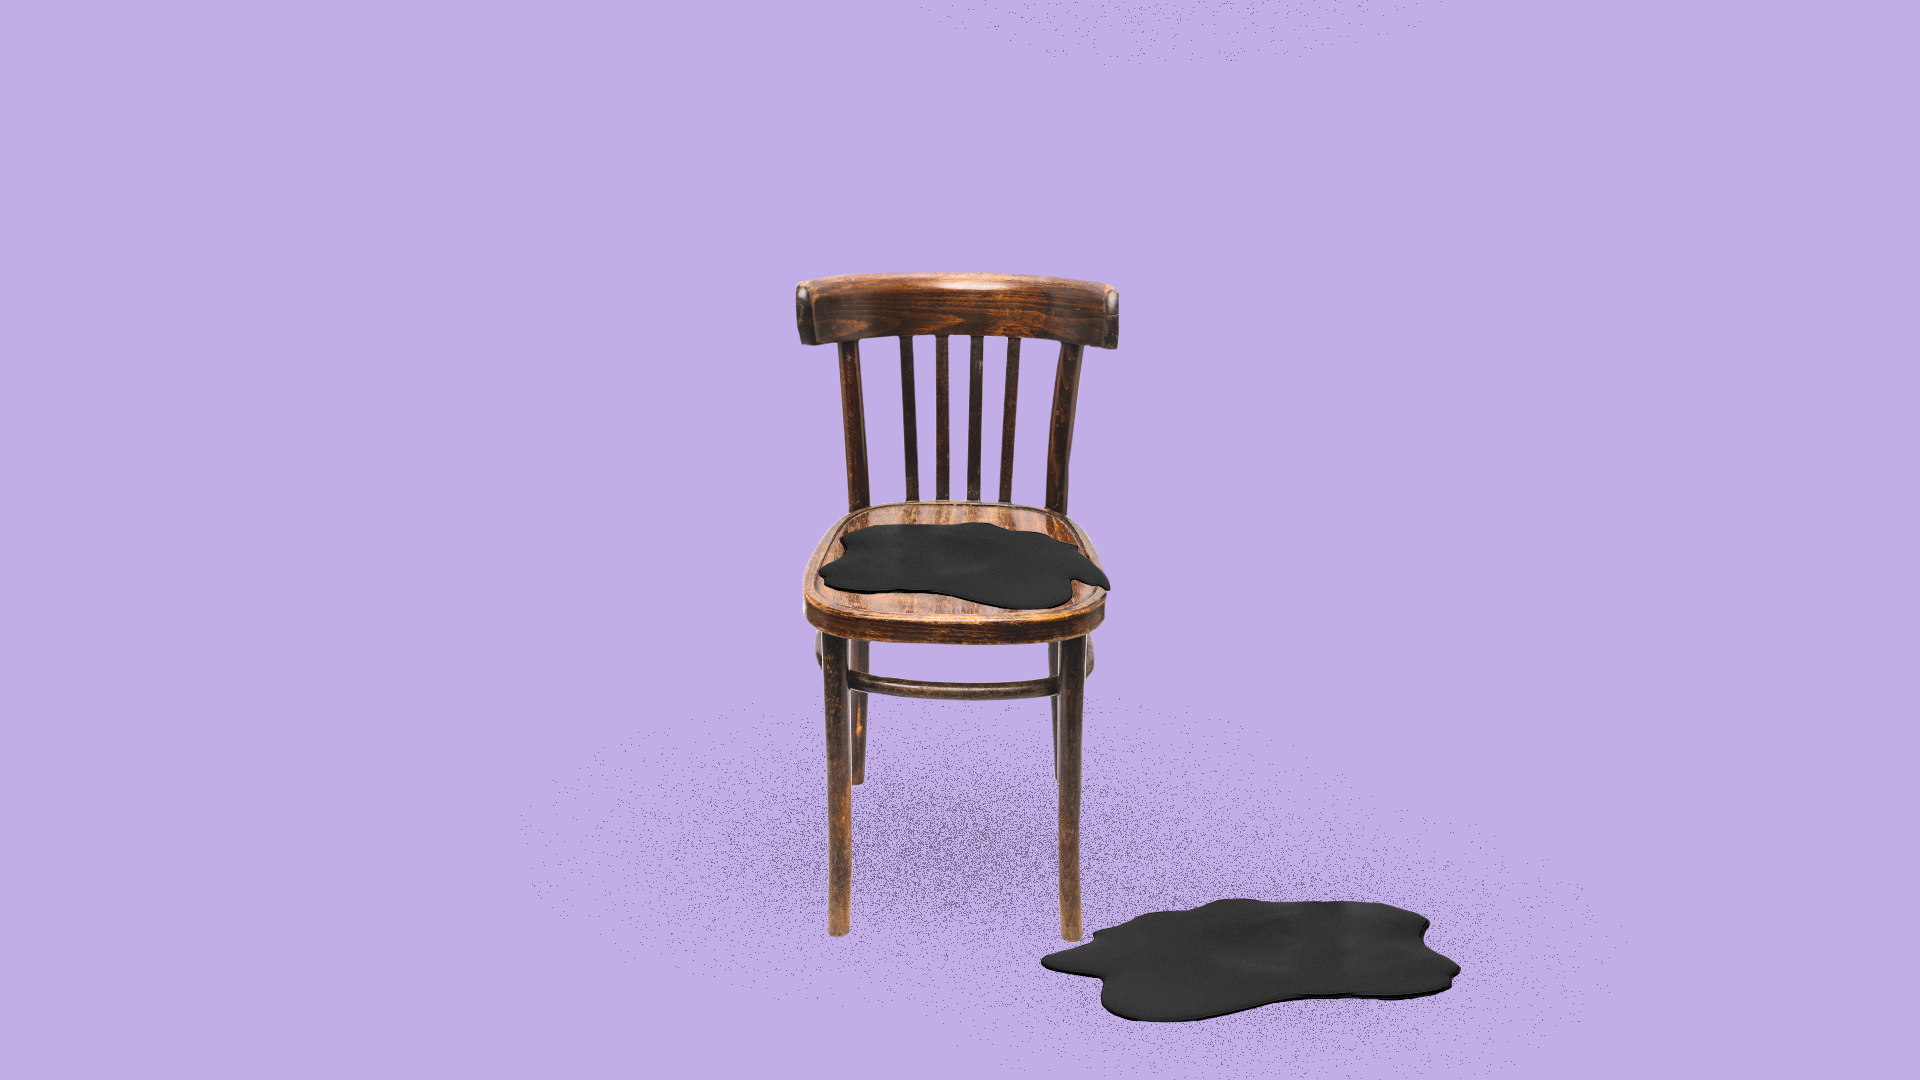 Animated photo illustration of a chair with oil dripping onto from above and onto the floor.